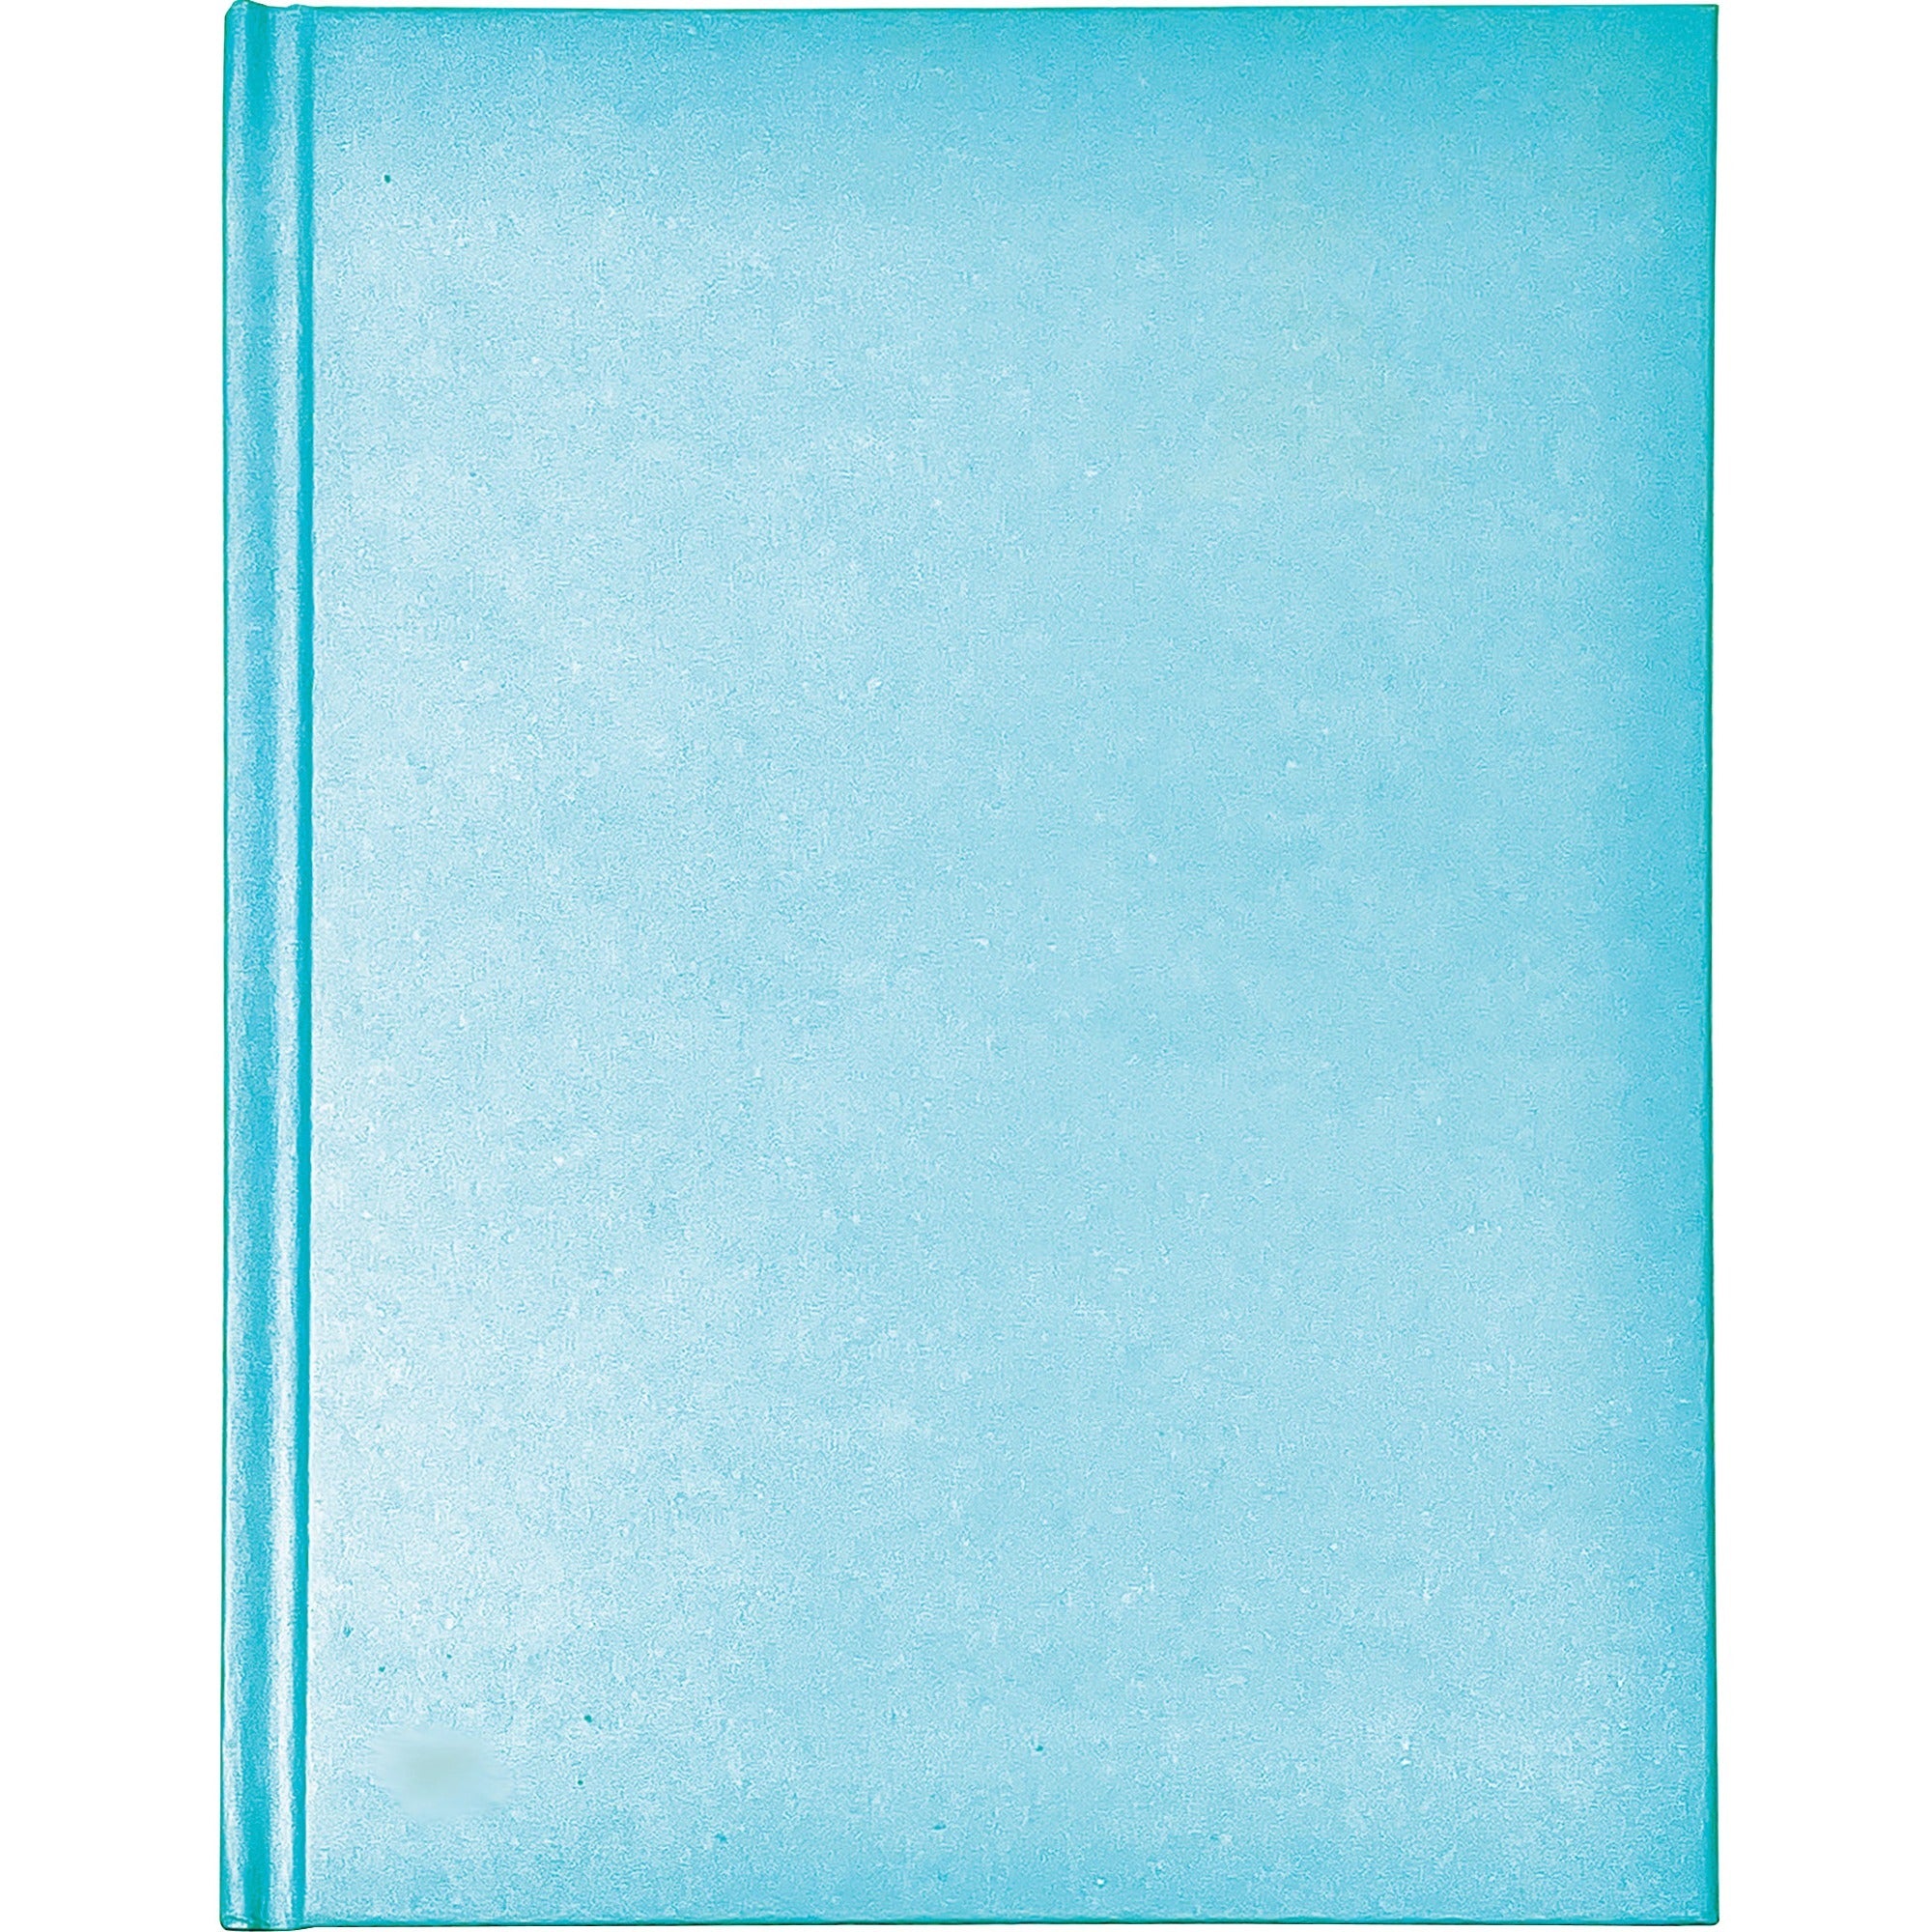 ashley-hardcover-blank-book-28-pages-6-x-8-blue-cover-hard-cover-durable-1-each_ash10714 - 2